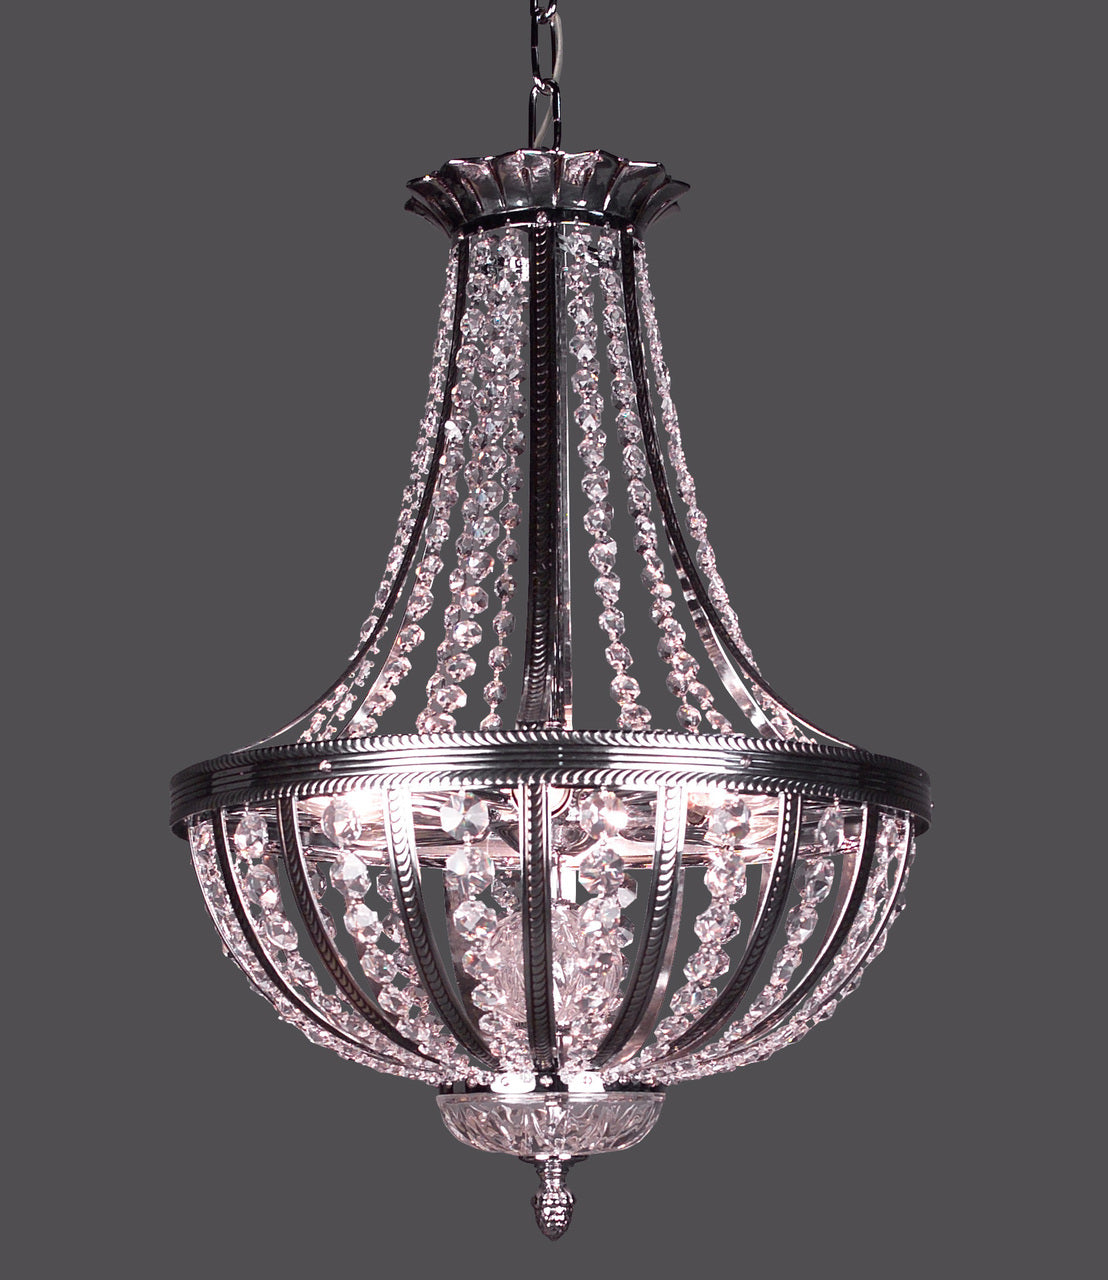 Classic Lighting 1924 CHB S Terragona Crystal Pendant in Chrome/Black Patina (Imported from Spain)